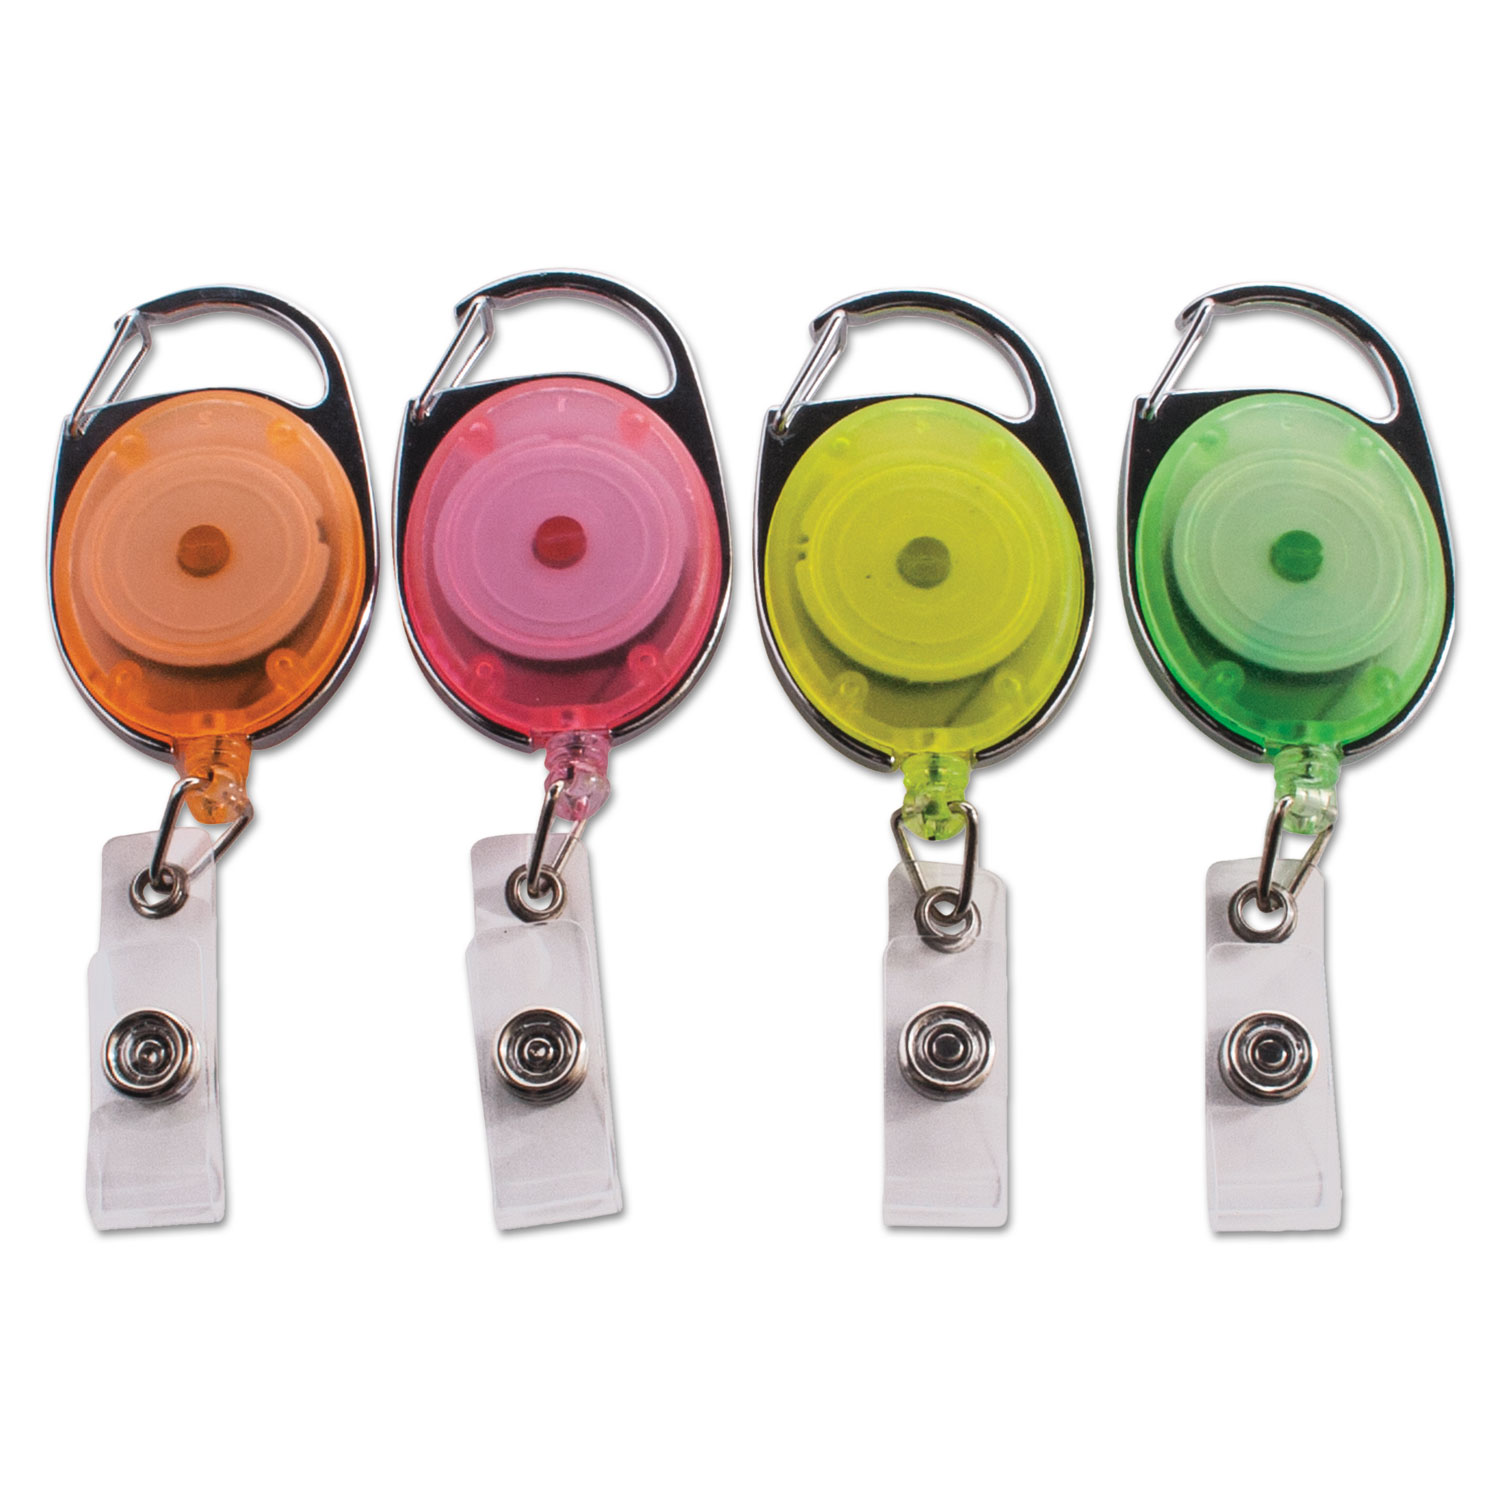  Advantus 91119 Carabiner-Style Retractable ID Card Reel, 30 Extension, Assorted Neon, 20/Pack (AVT91119) 